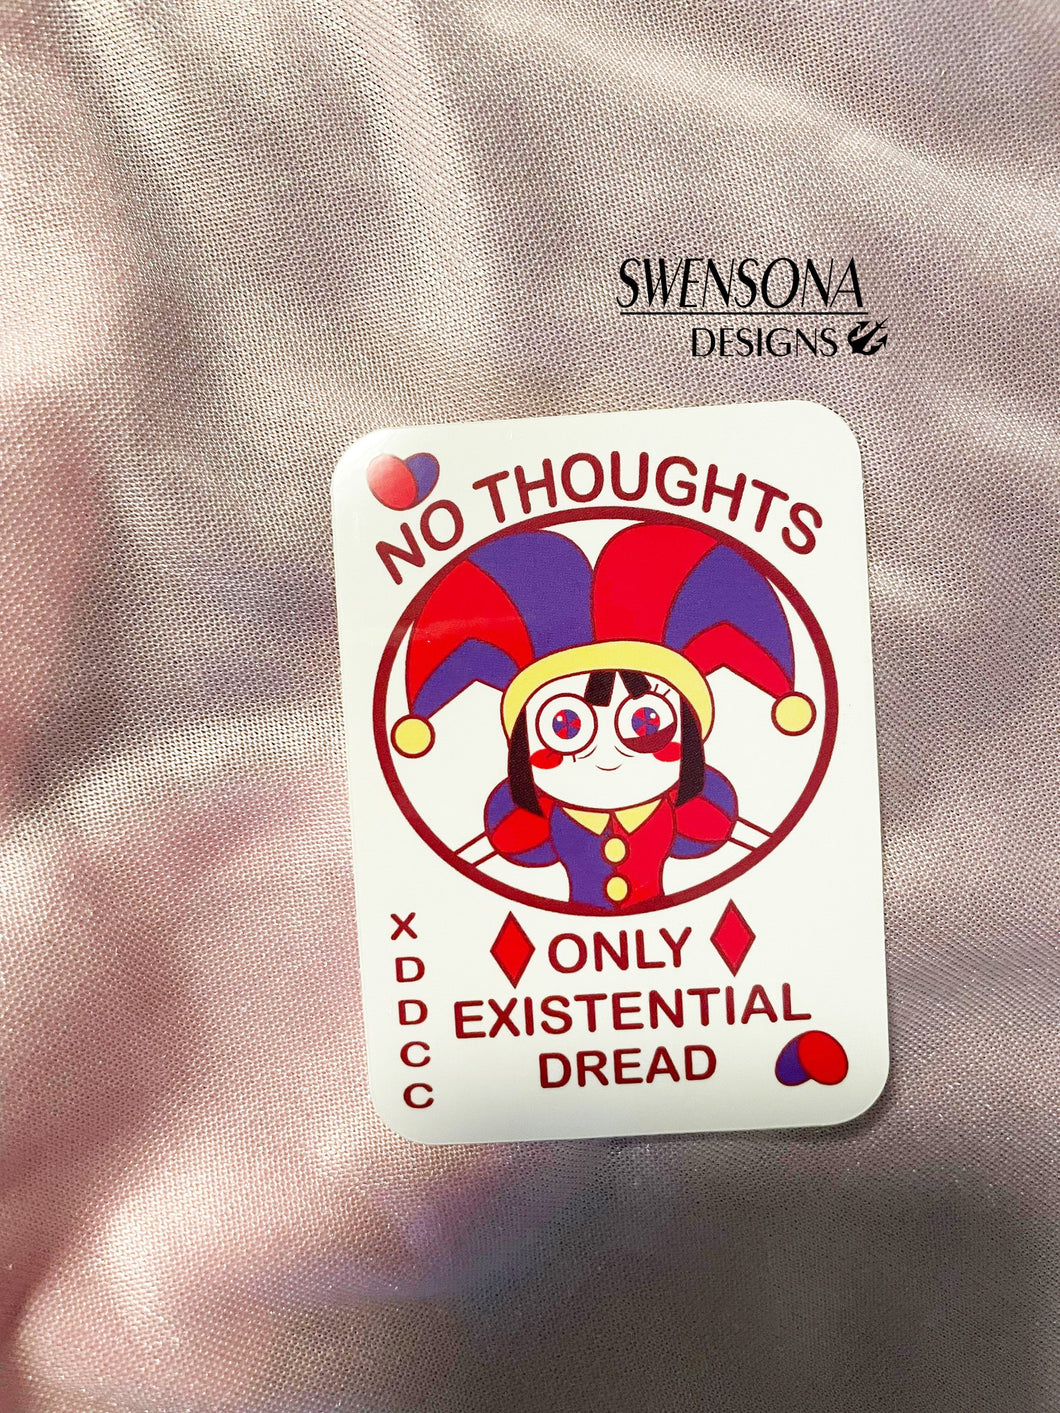 No thoughts only dread sticker